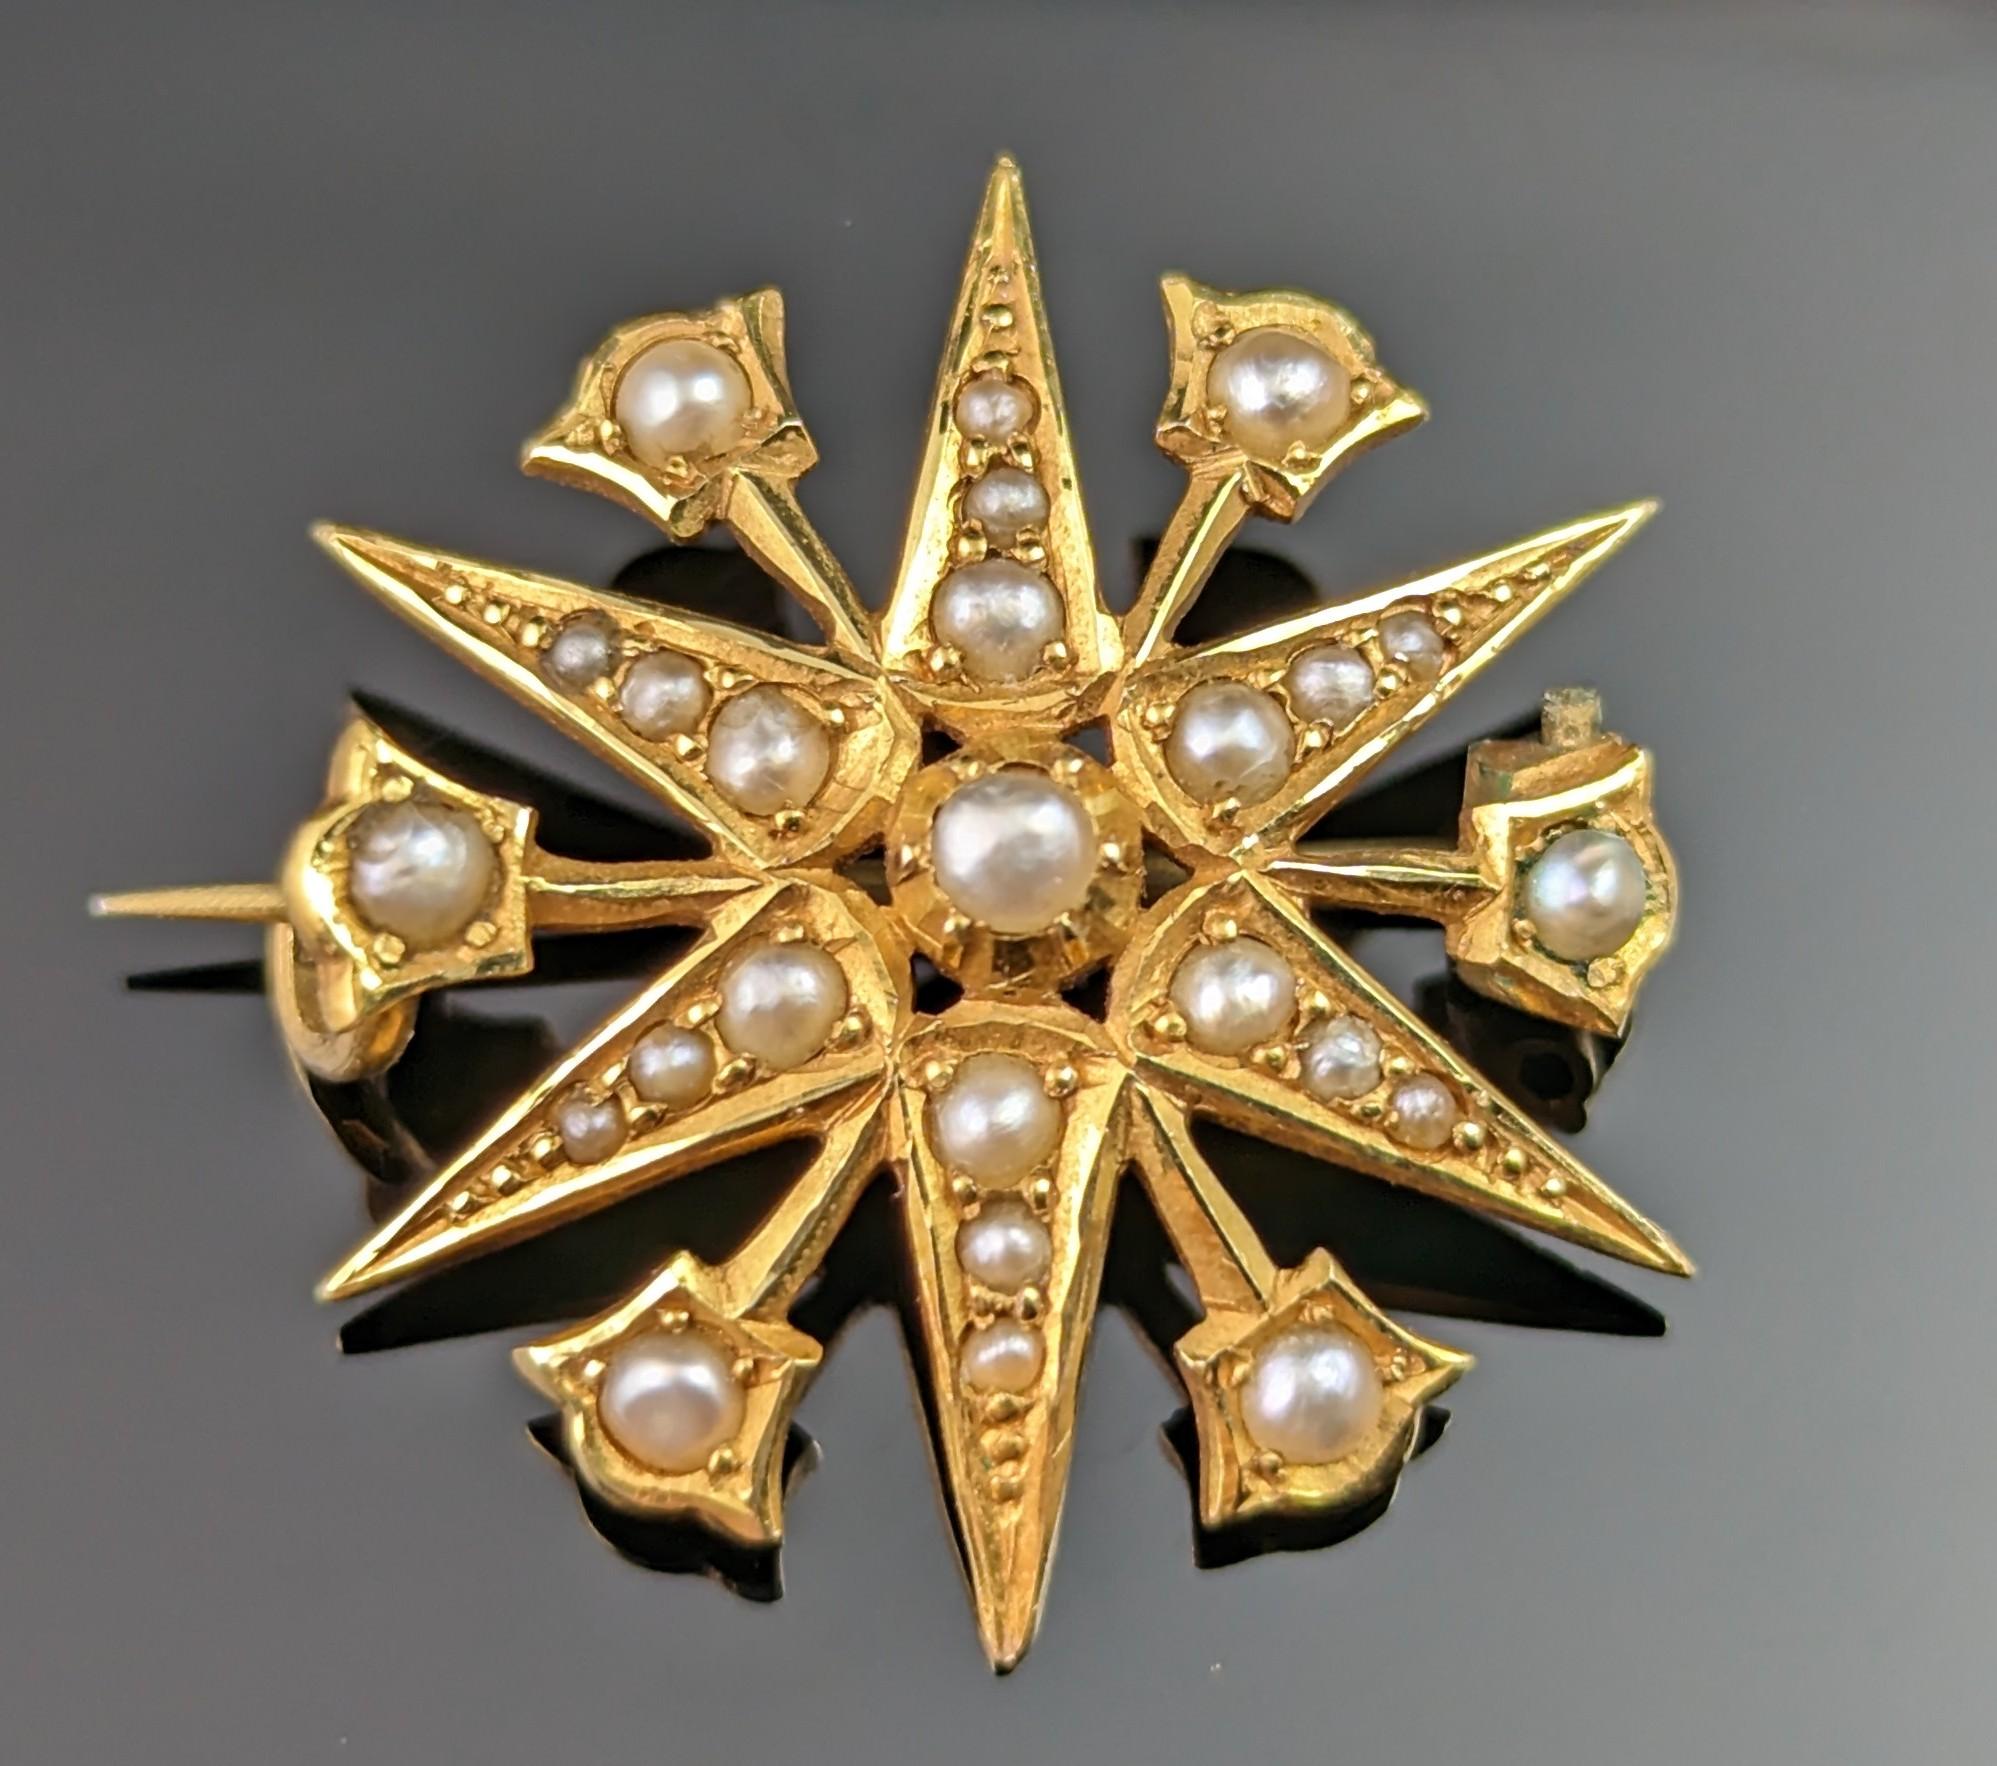 Celestial jewellery pieces like this antique 15kt gold and Pearl star brooch just never go out of style!

Stars and celestial jewels have a timeless allure that just keeps on going and they are as wearable today as they were then.

This beautiful